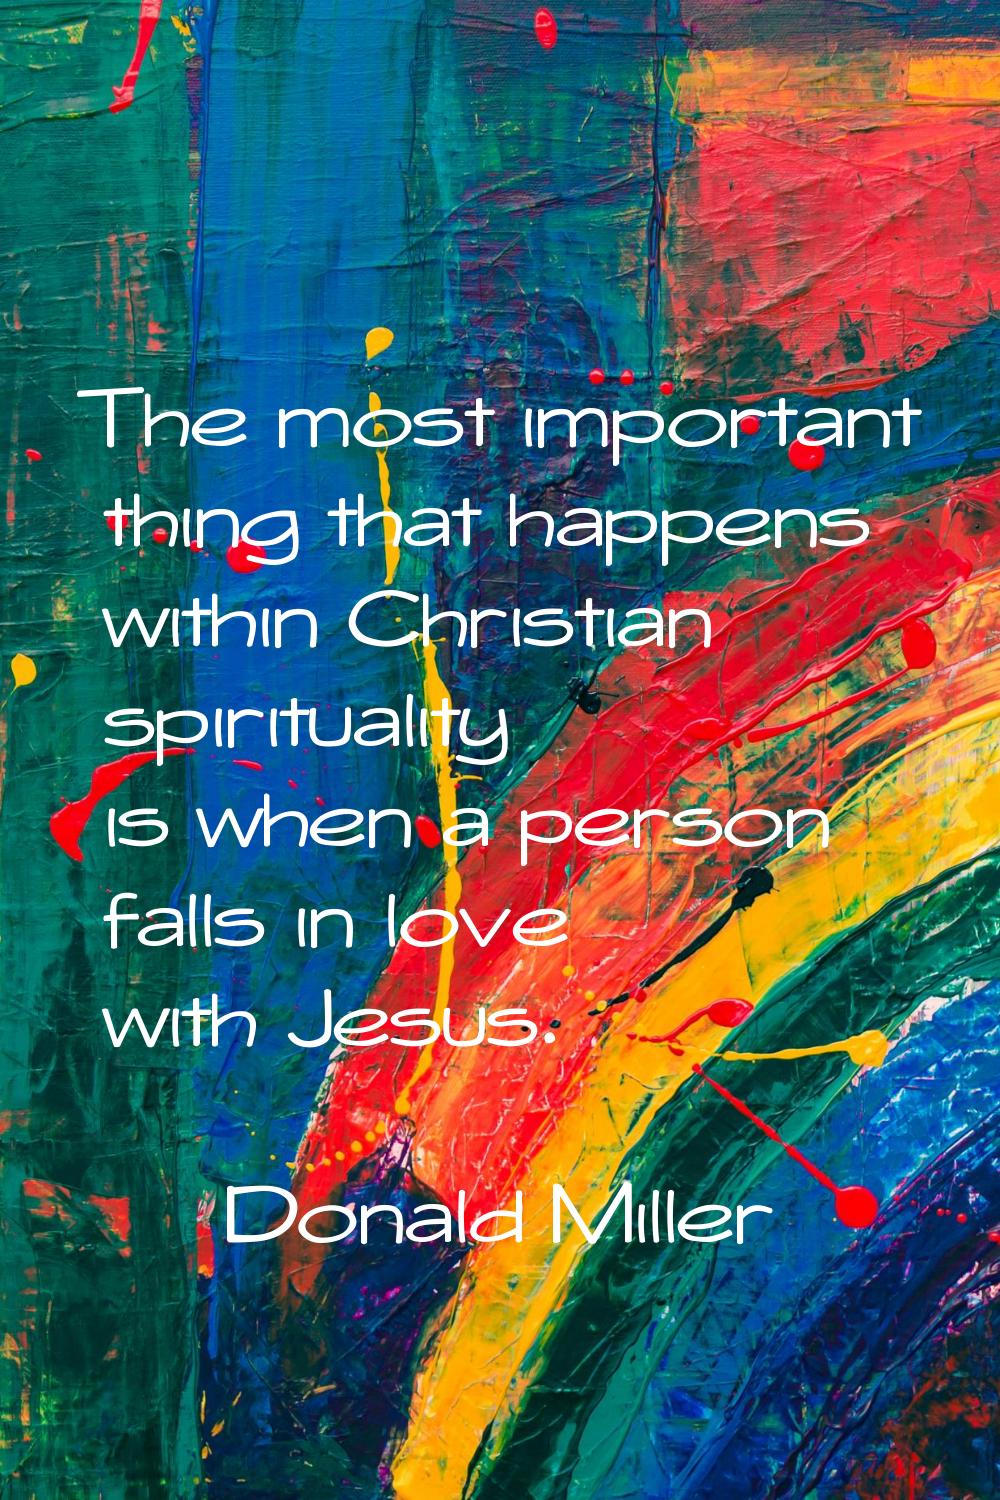 The most important thing that happens within Christian spirituality is when a person falls in love 